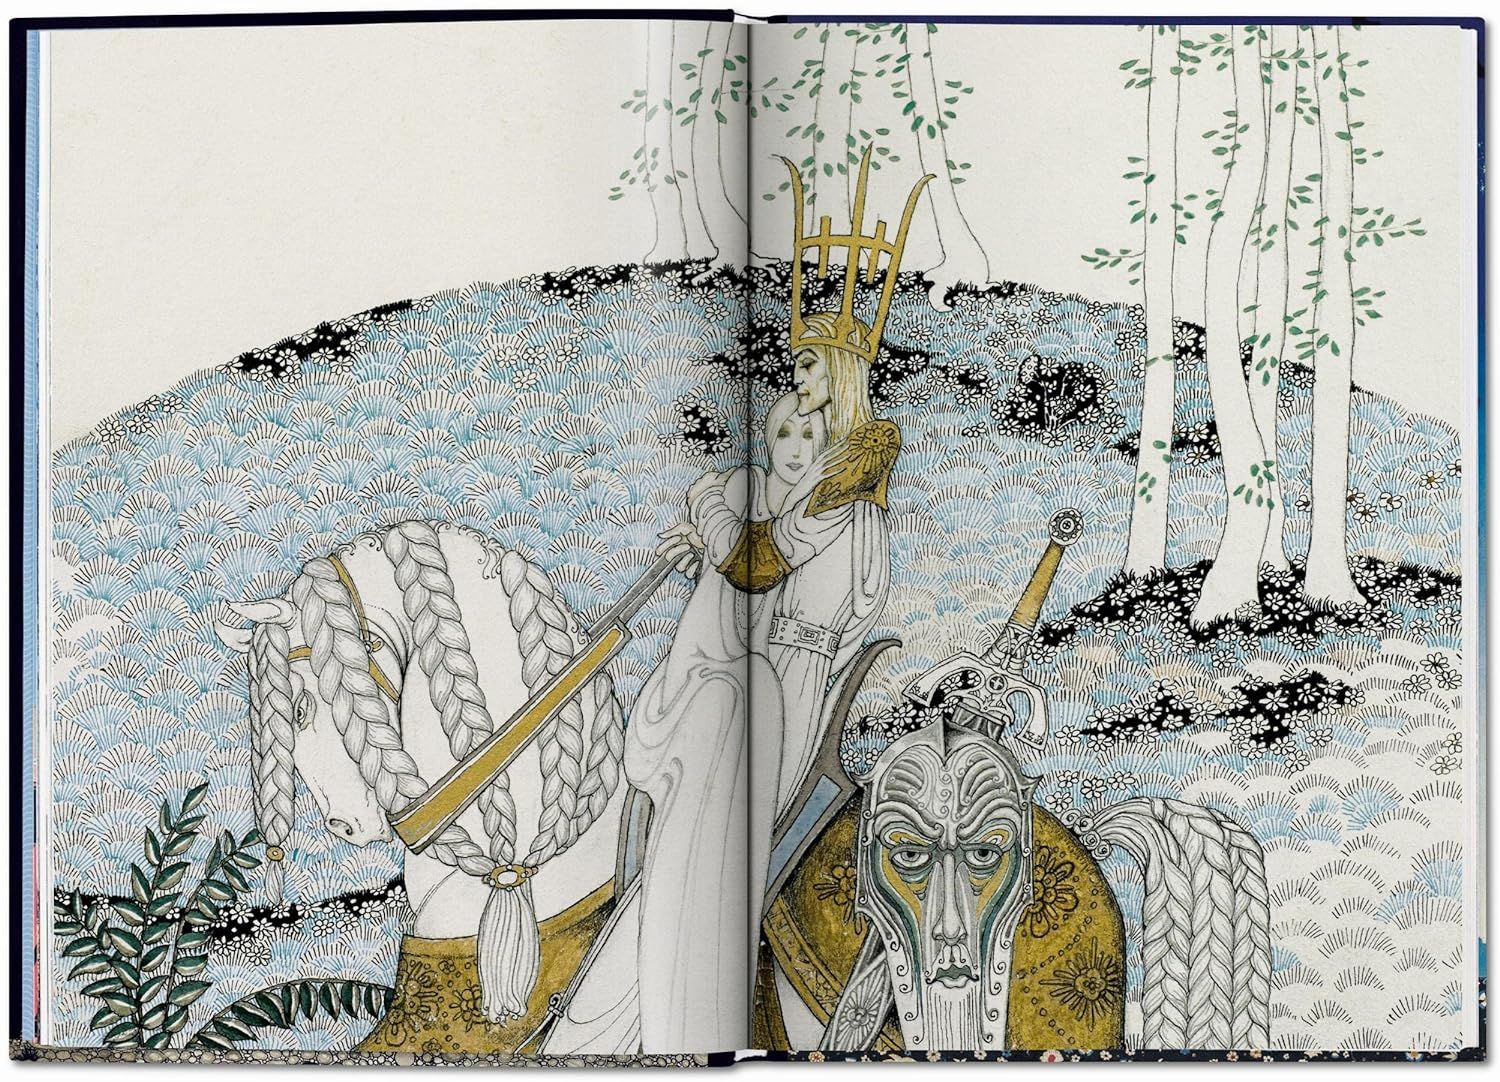  Kay Nielsen. East of the Sun and West of the Moon 